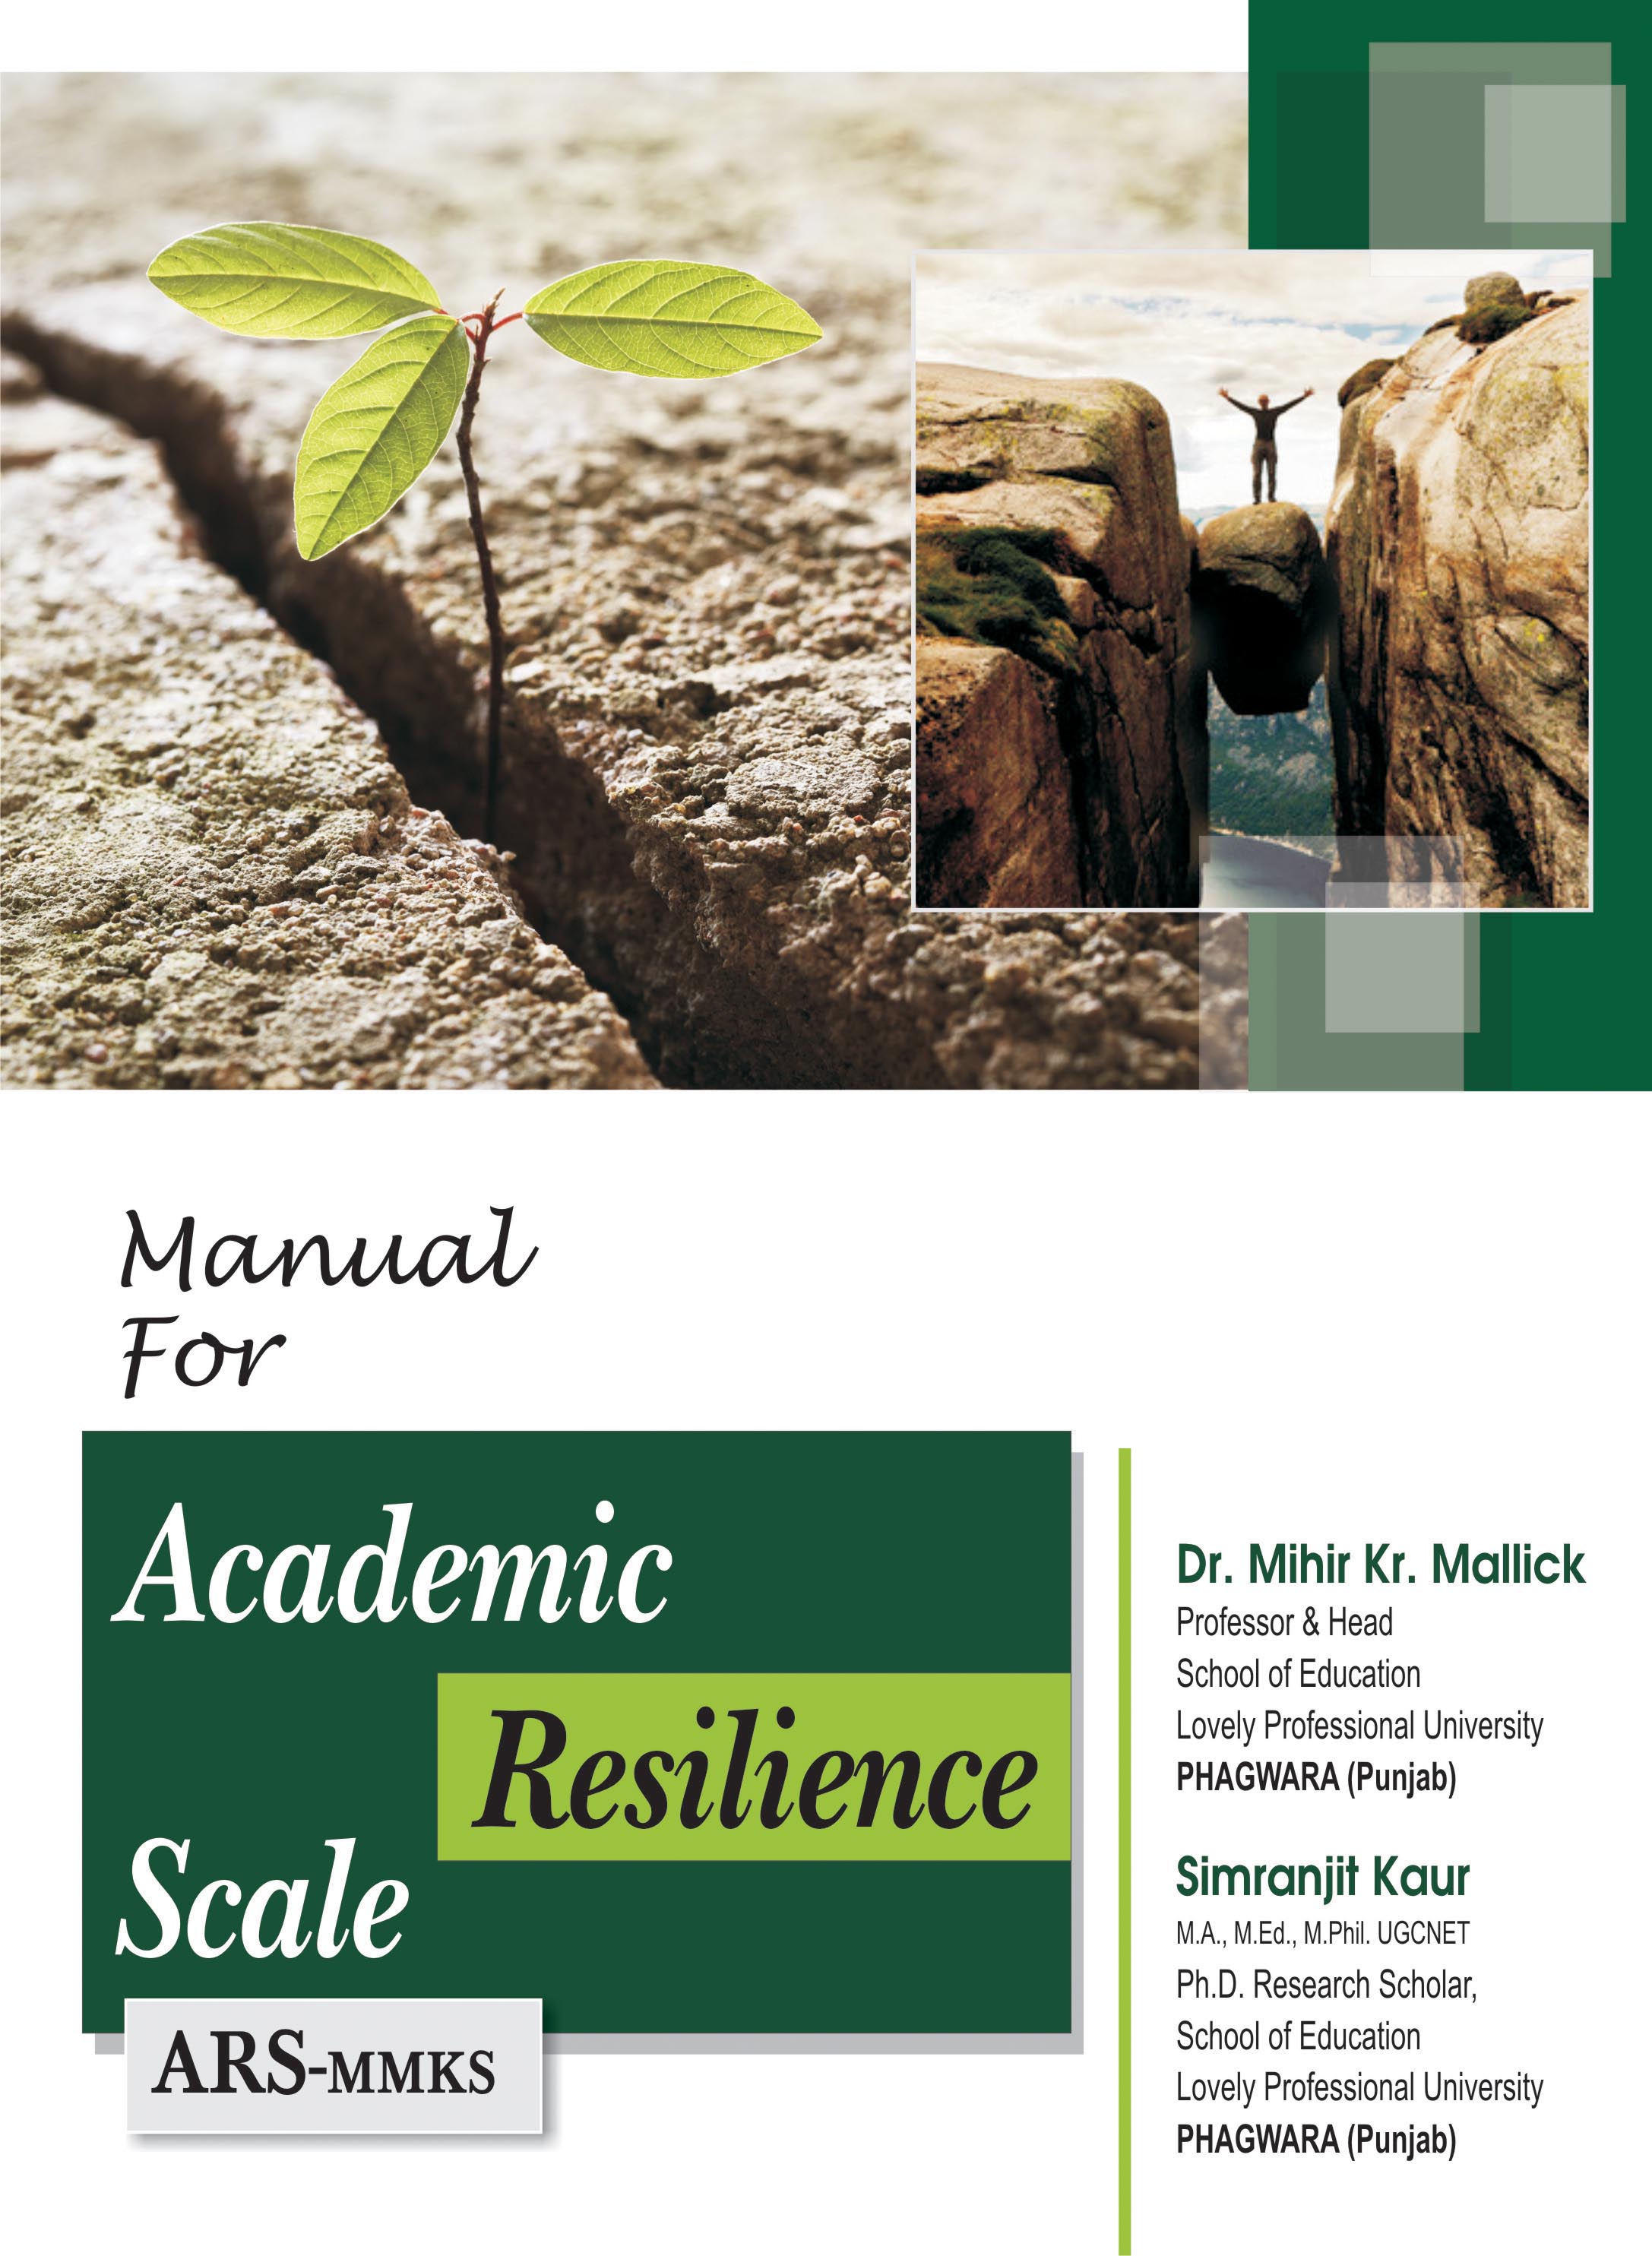 ACADEMIC-RESILIENCE-SCALE